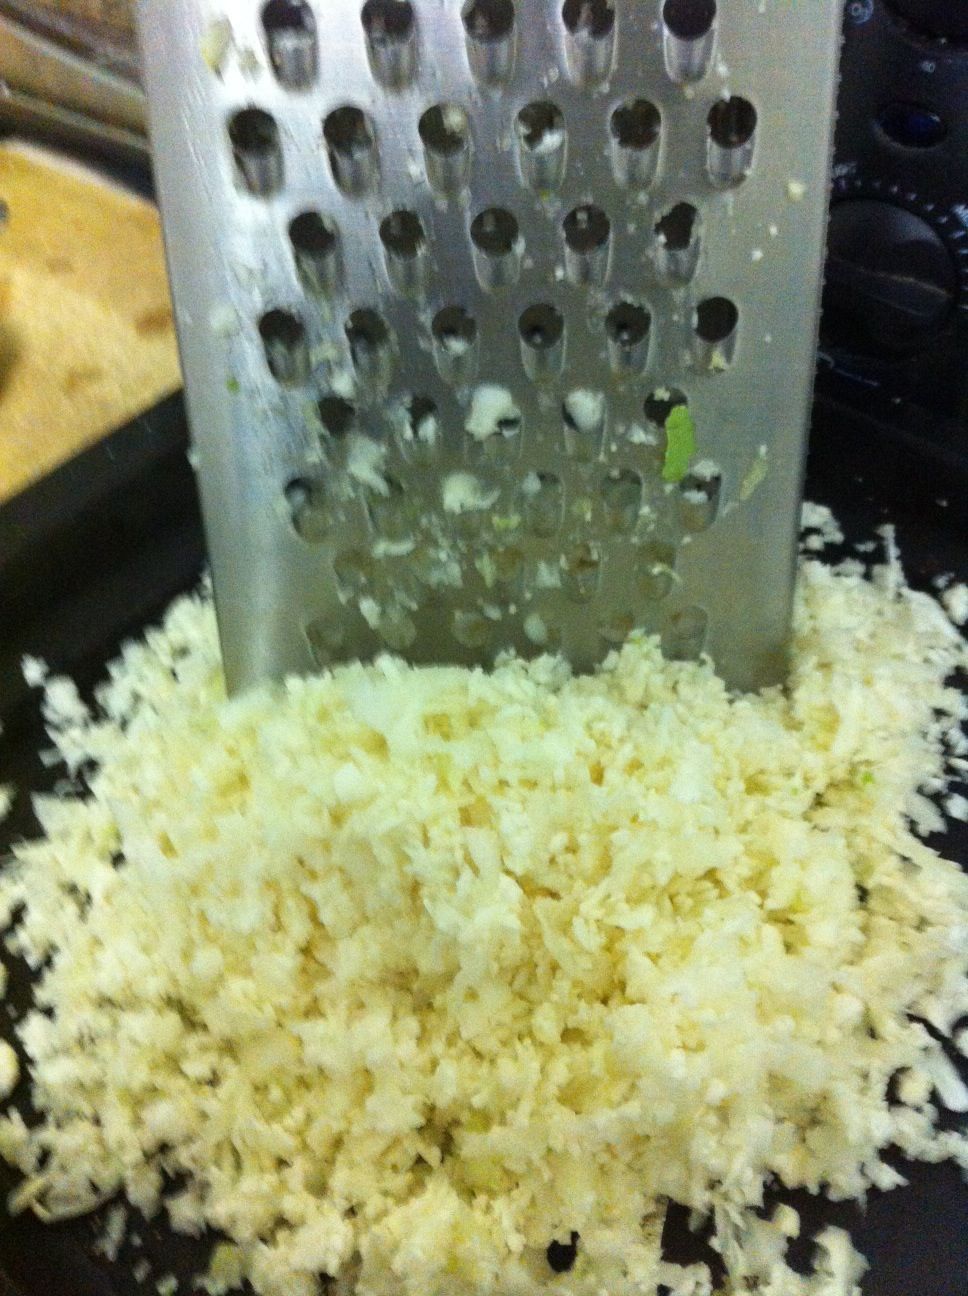 “Rice” the cauliflower by grating it with the widest hole in a chees